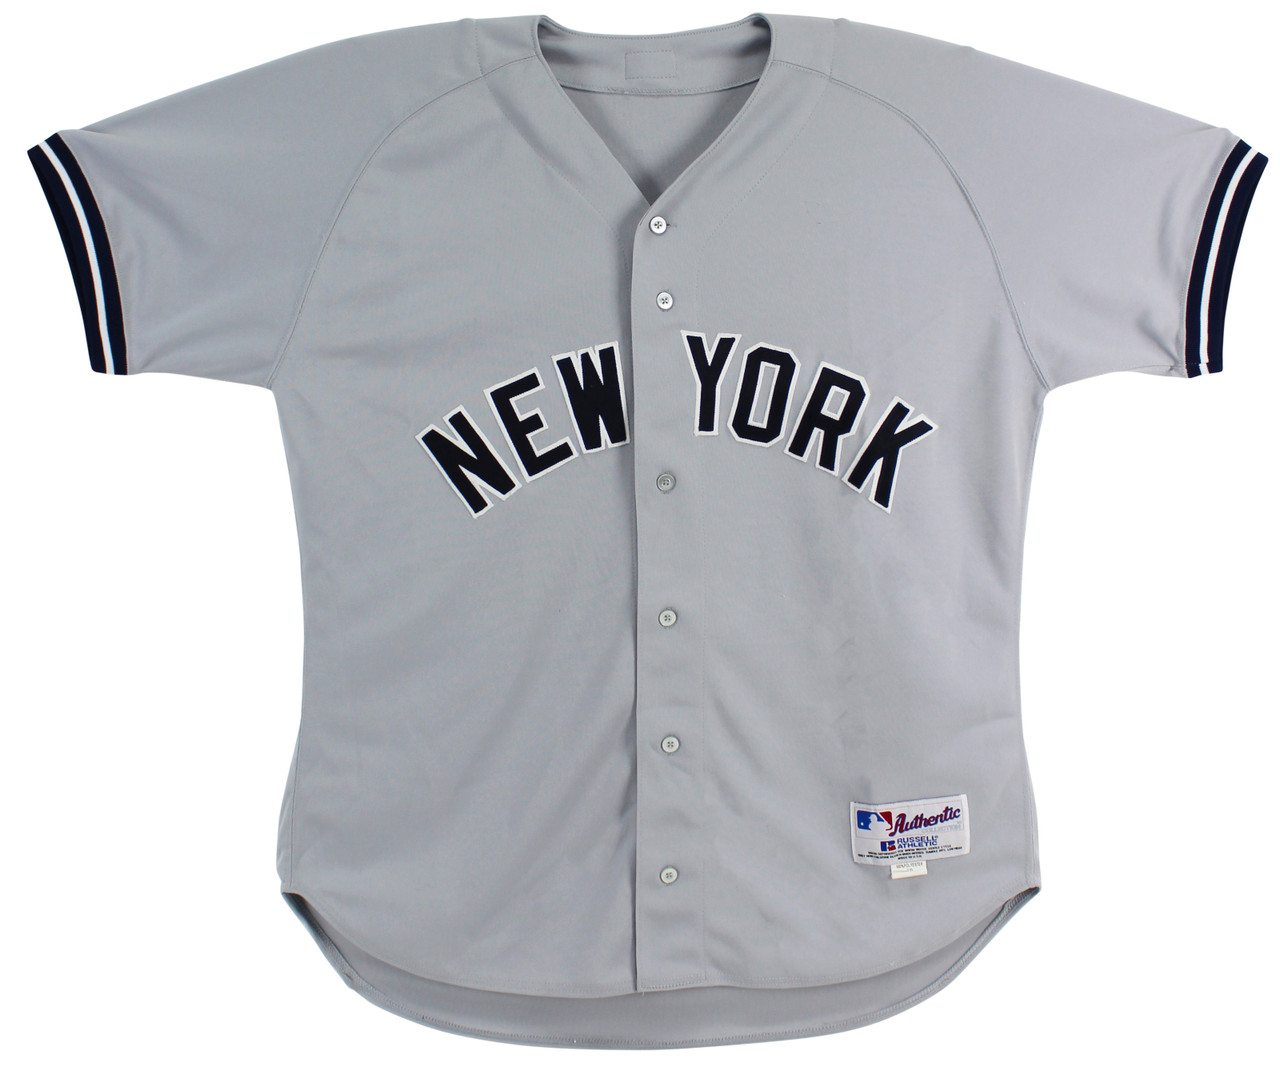 Official New York Yankees Autographed Jerseys, Yankees Collectible Jersey,  Game-Used Jerseys